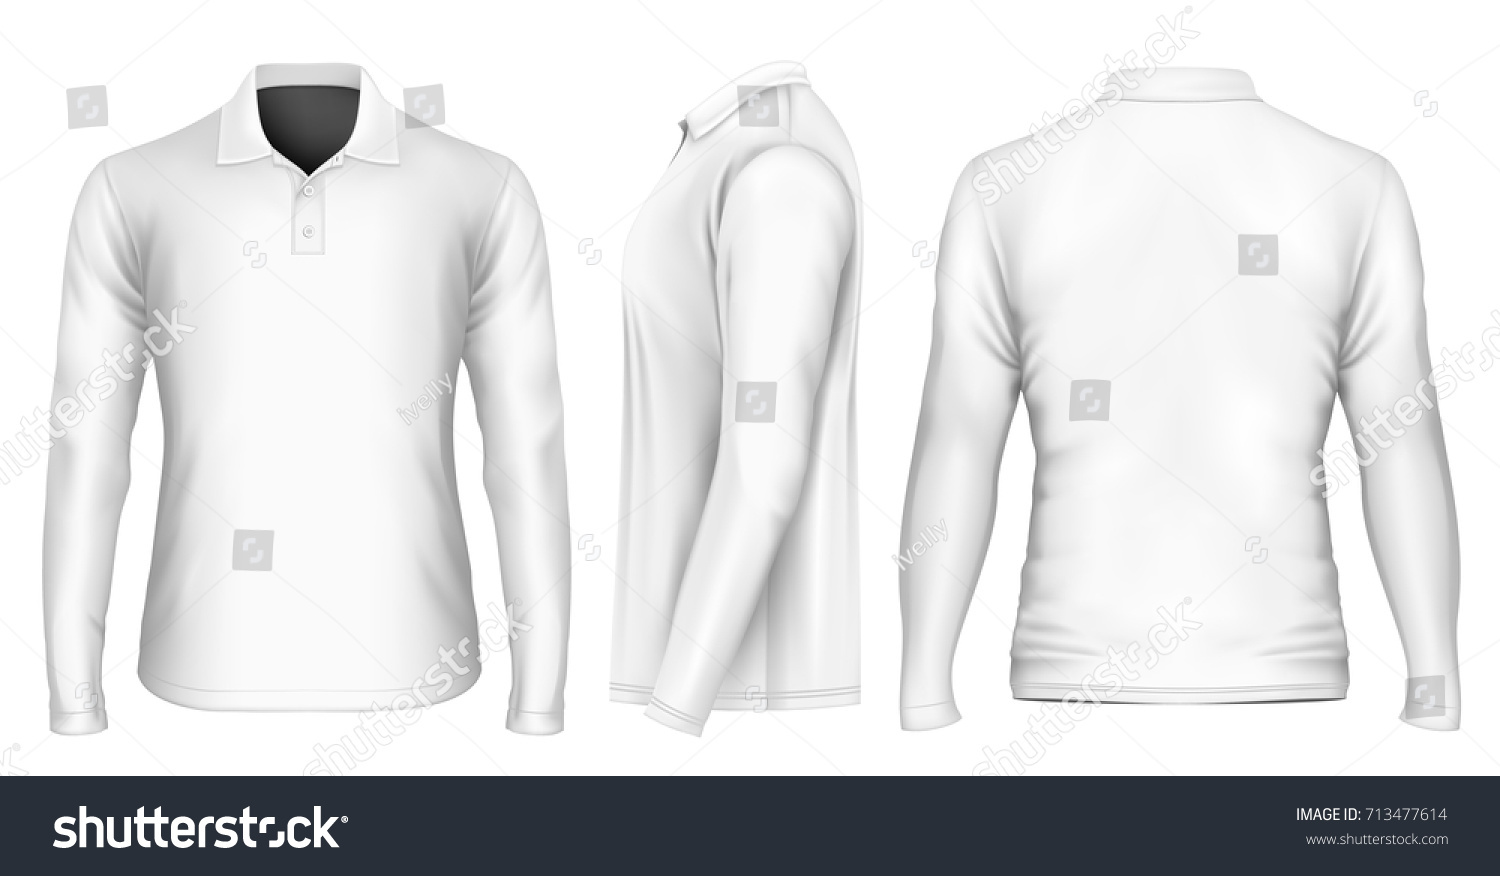 Men's polo-shirt front, back and side views. Vector illustration. #713477614